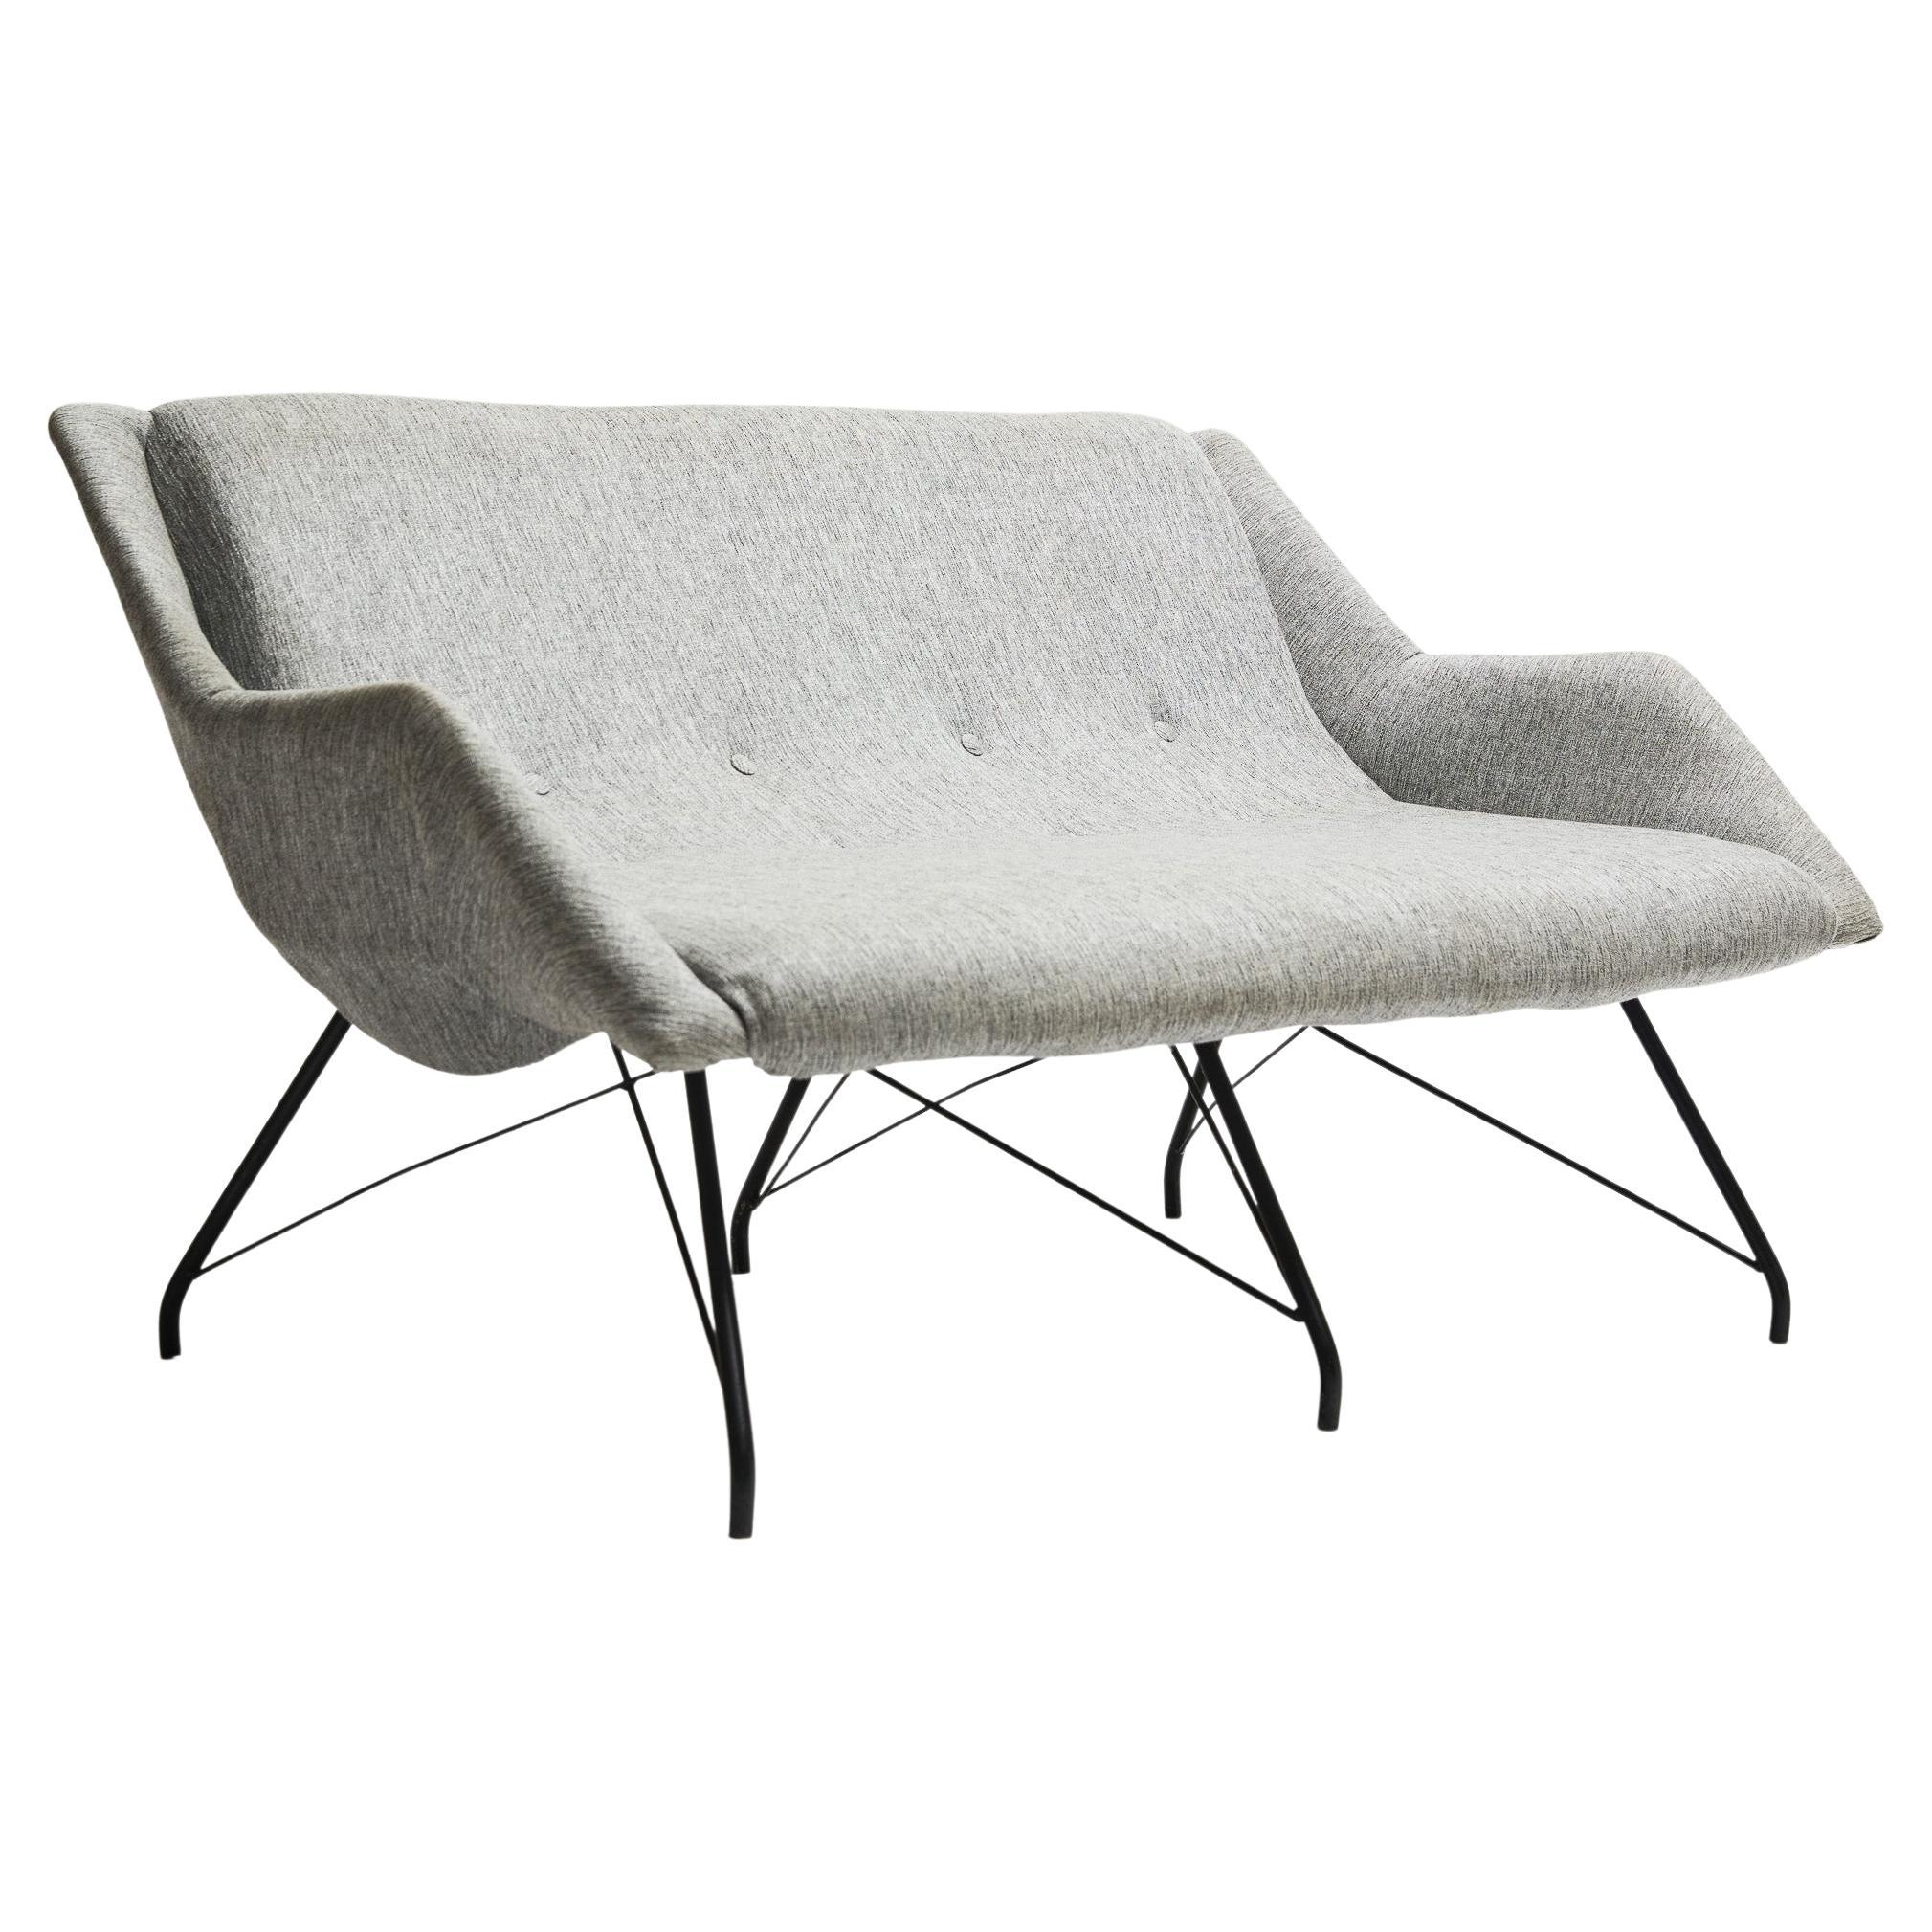 Midcentury Modern Loveseat in Iron and Grey Fabric by Carlo Hauner, Brazil  1955 For Sale at 1stDibs